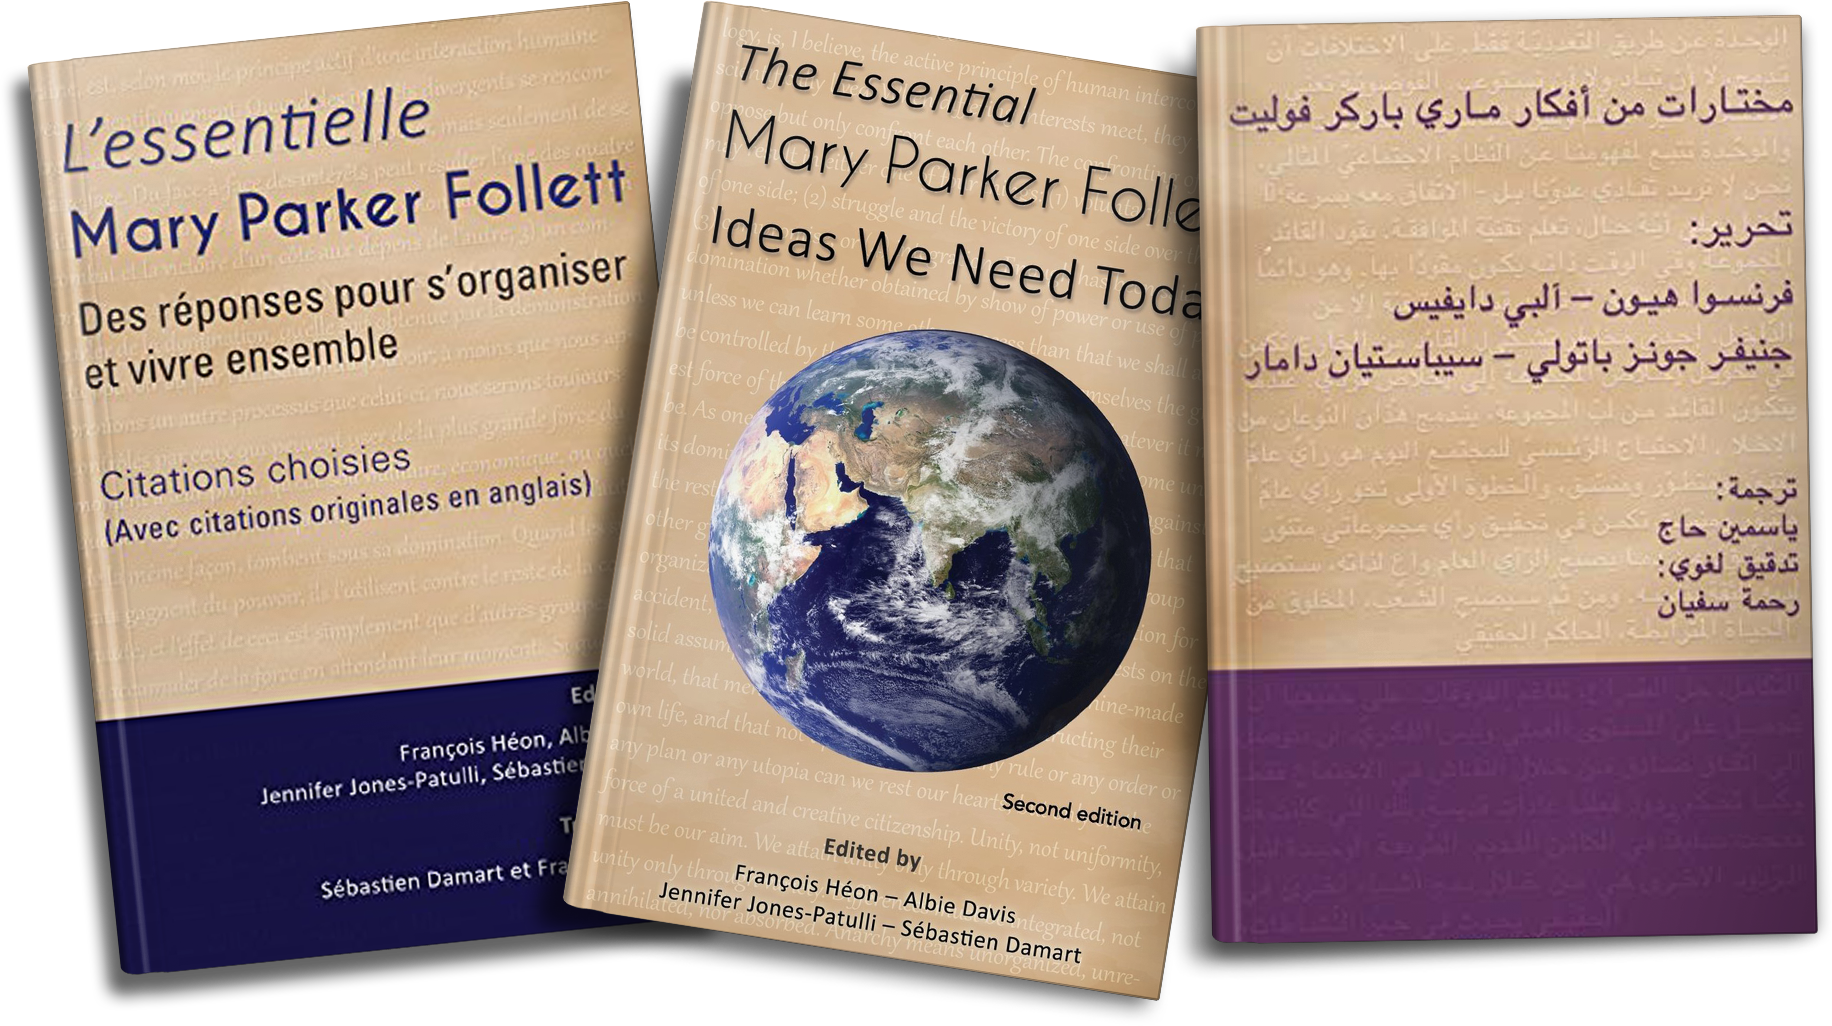 The Essential Mary Parker Follet